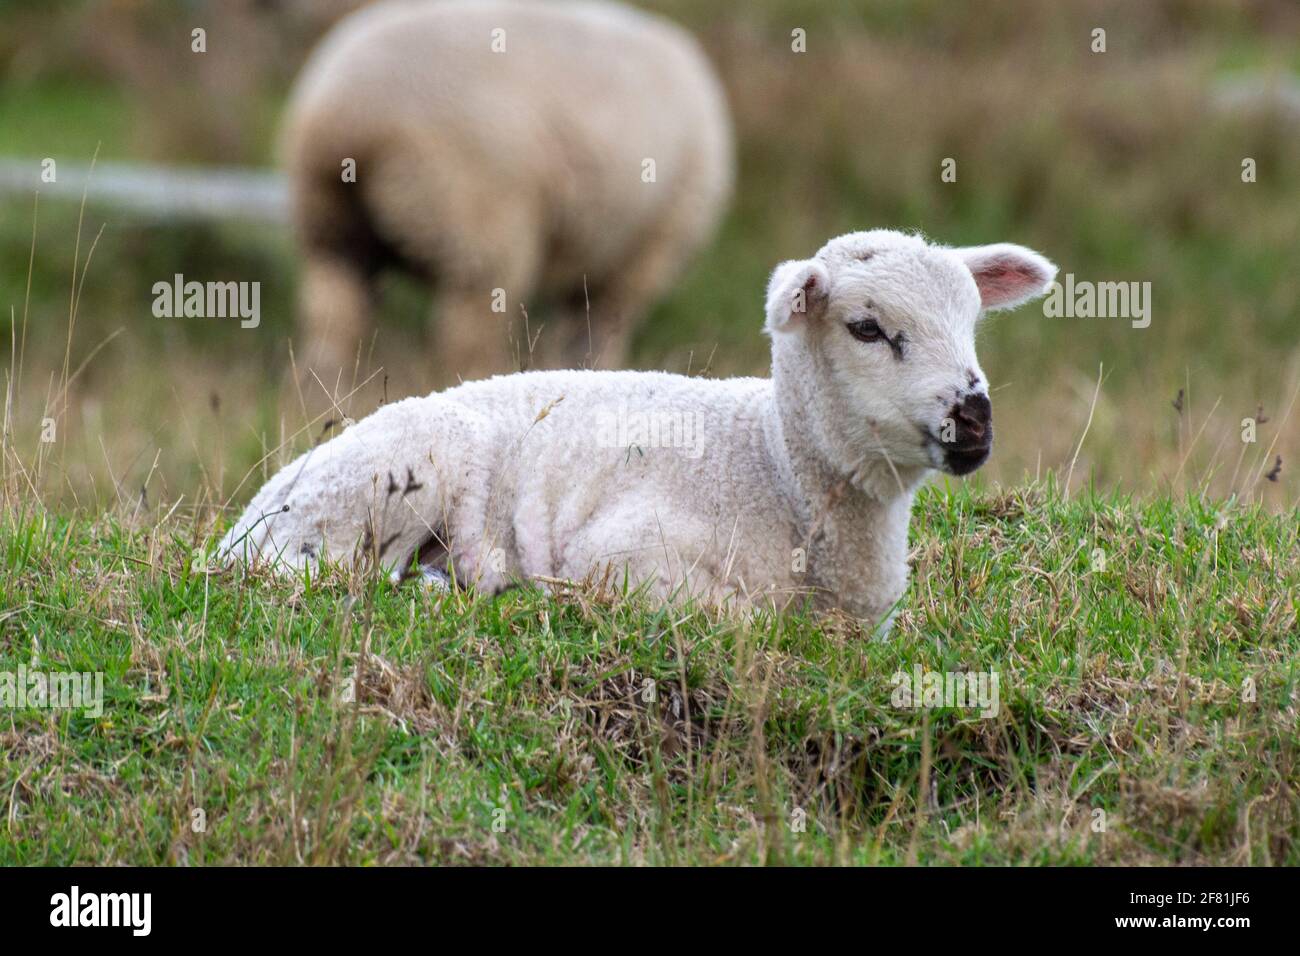 Baby sheep free and happy wandering around Guasca, Colombia Stock Photo